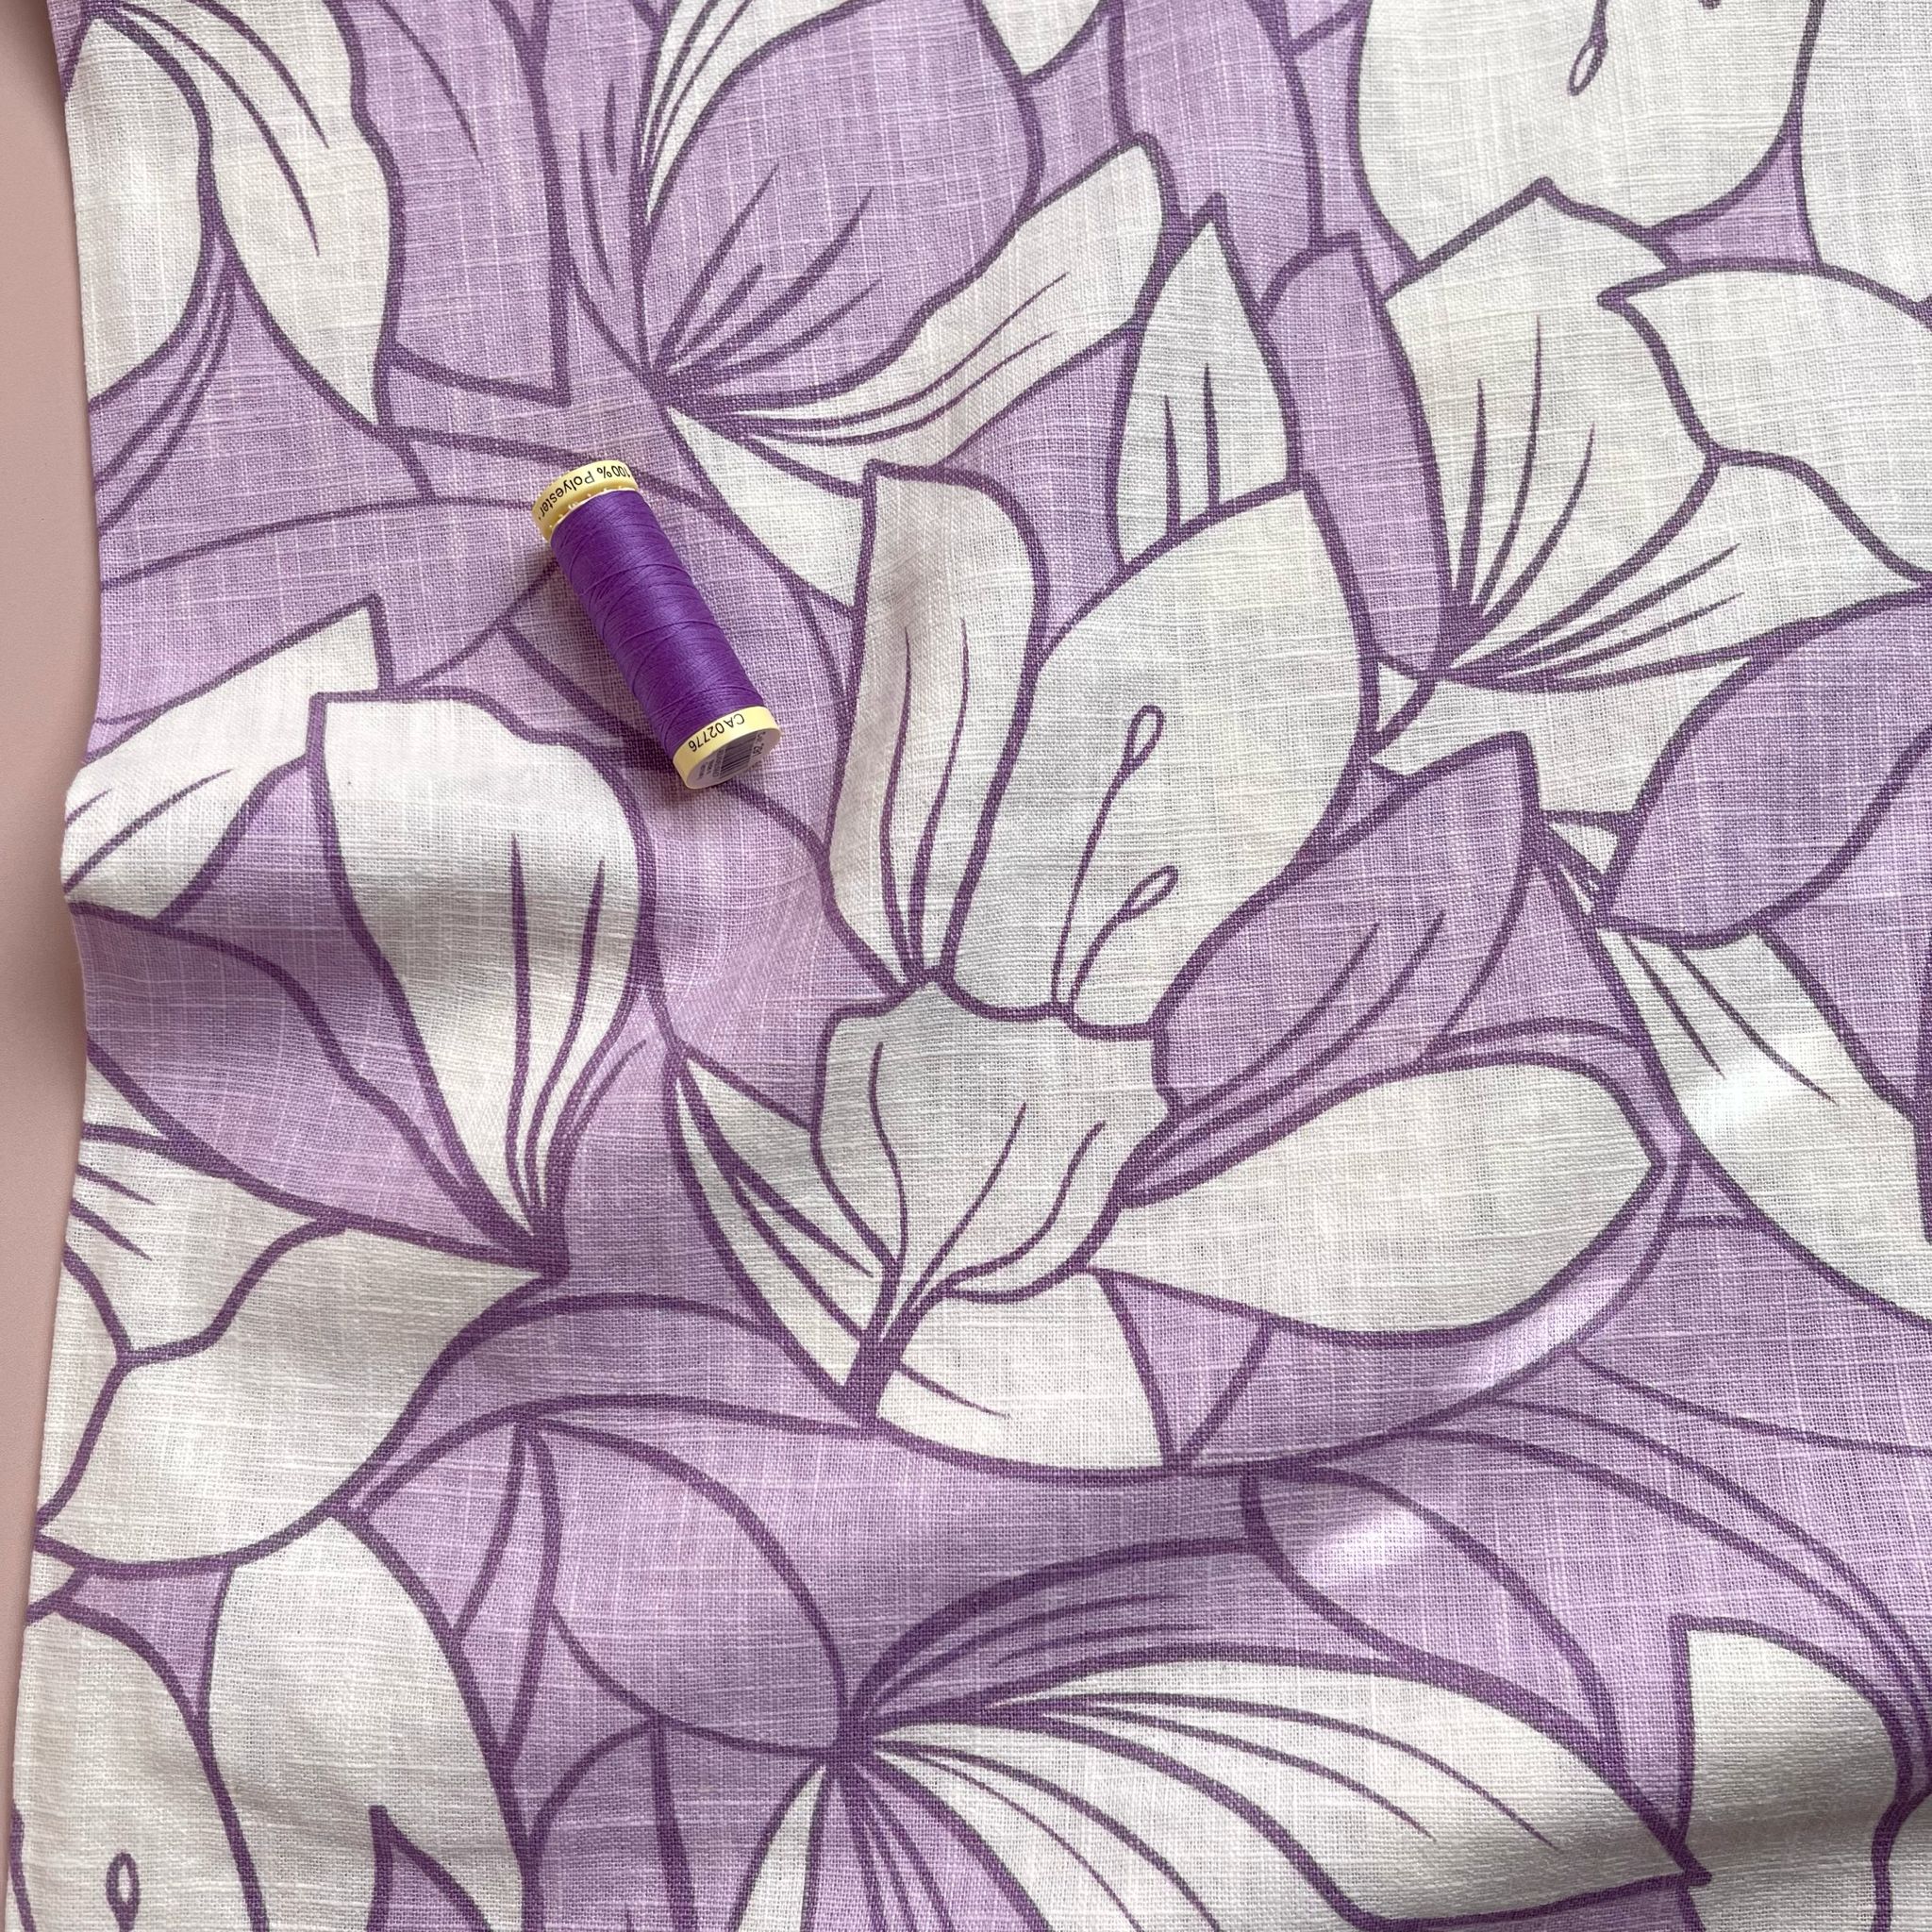 Lilac Leaves on Pure Washed Linen Cotton Fabric